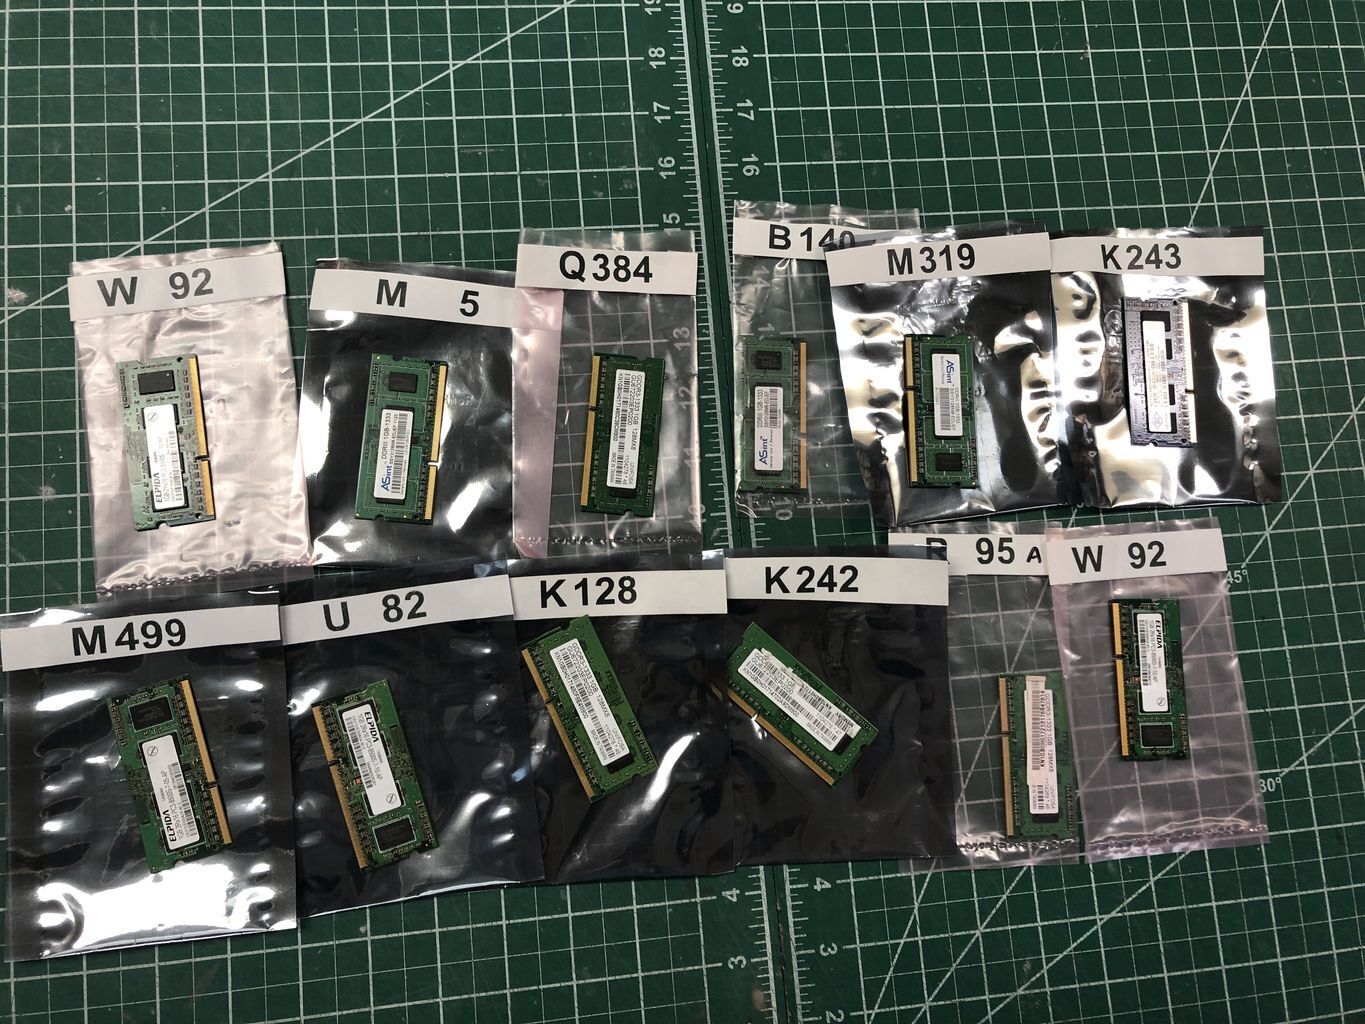 Lot of 12 pcs 1GB (12GB total) DDR2 DDR3 Assorted SODIMM Laptop Memory RAM Cards